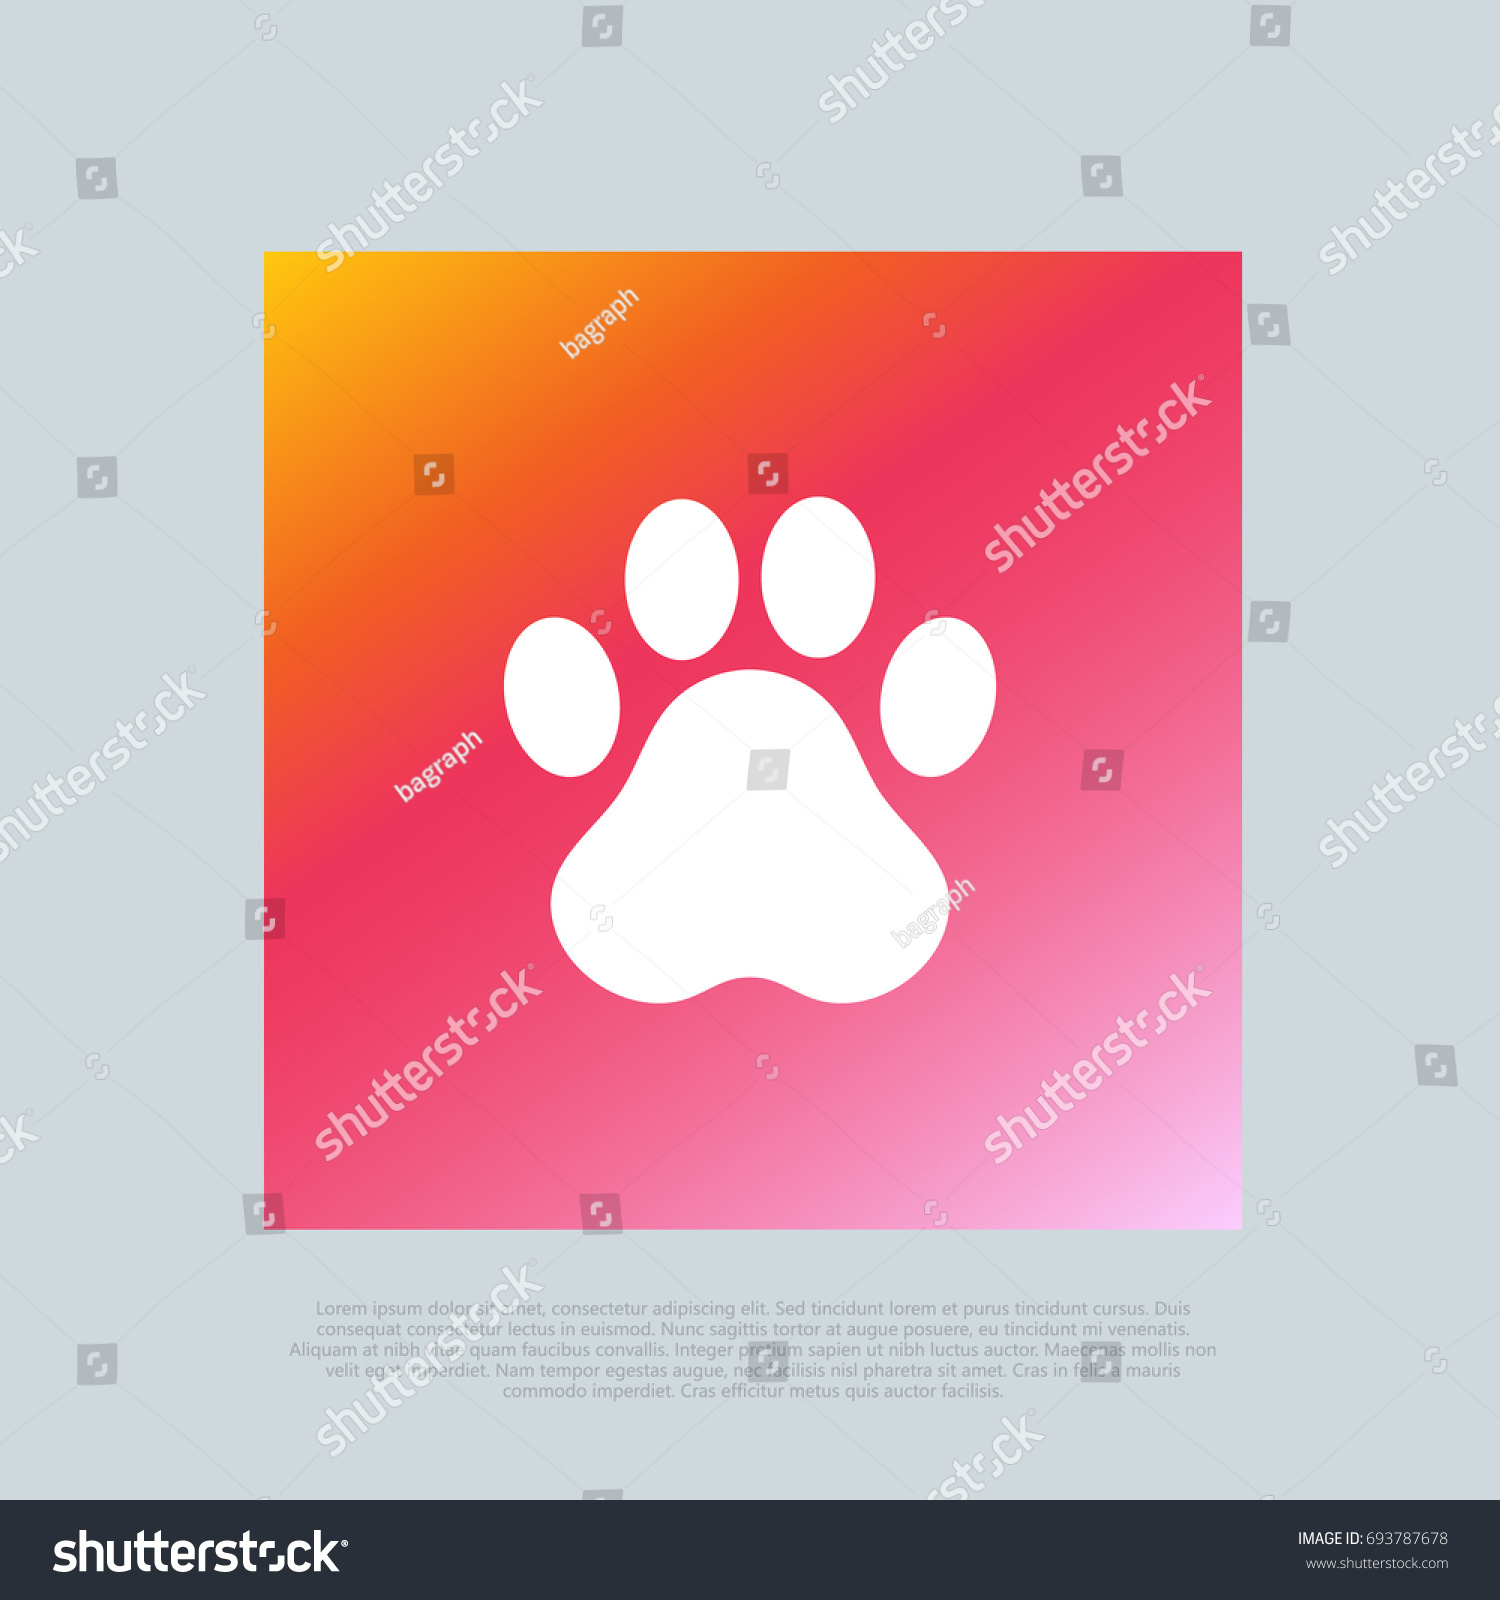 SVG of Animal Footprint. Pet fingers. Vector favicon clip-art. Compatible with PNG, JPG, AI, CDR, SVG, EPS, PDF, ICO. svg